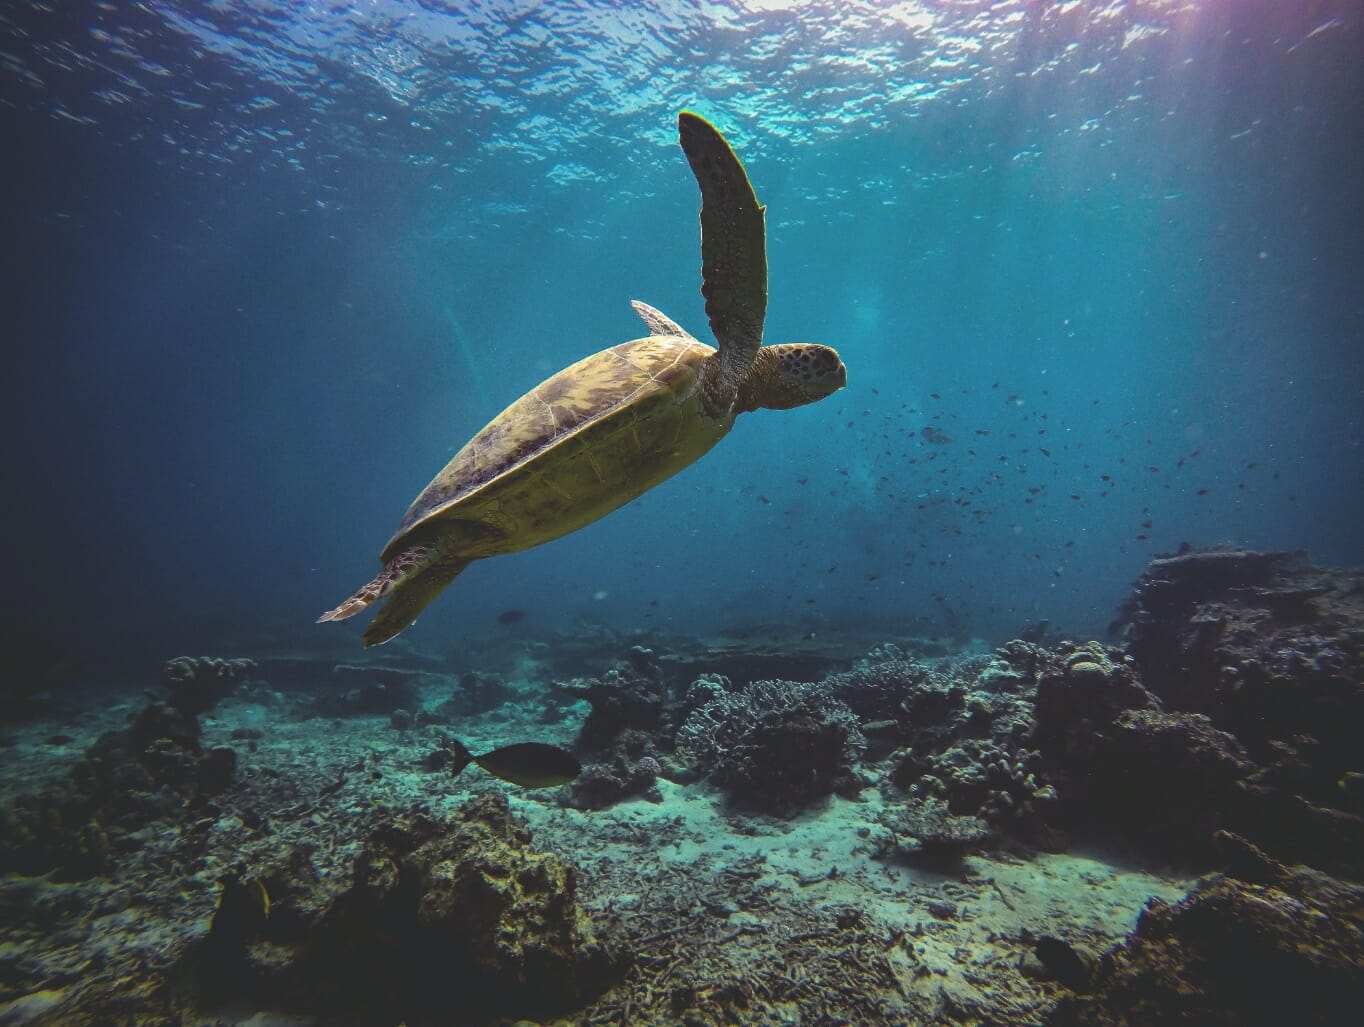 Image of a sea turtle swimming underwater with the sea floor visible below and sunlight streaming into the water visible above